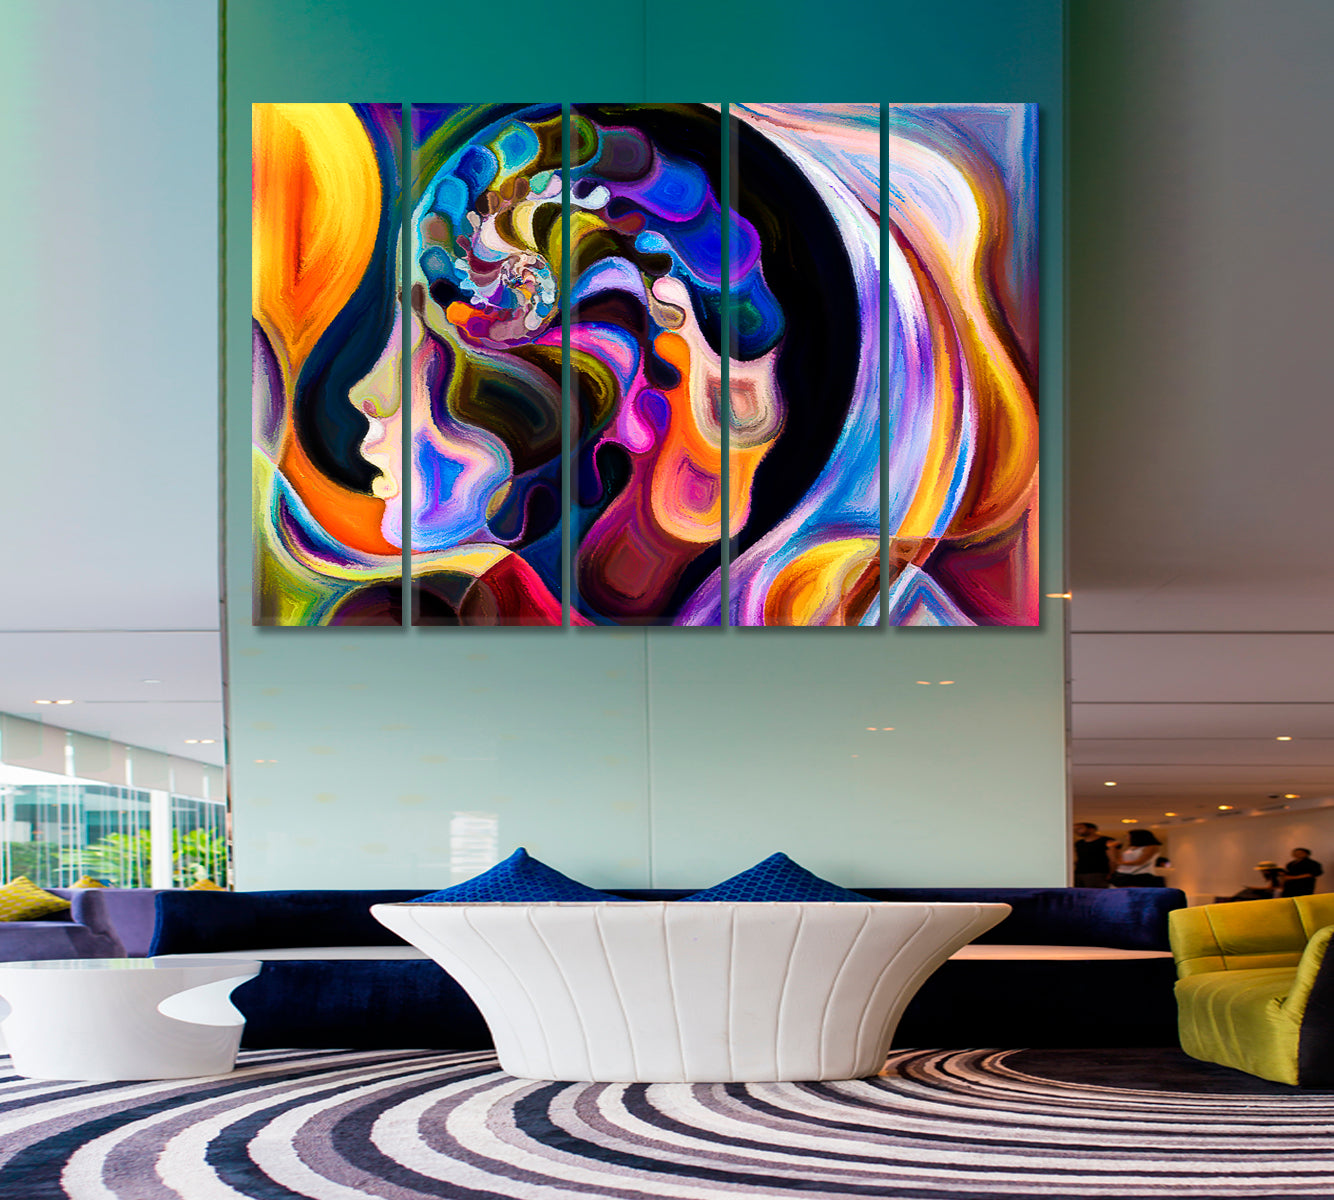 Life Forms In Mind Abstract Art Print Artesty 5 panels 36" x 24" 